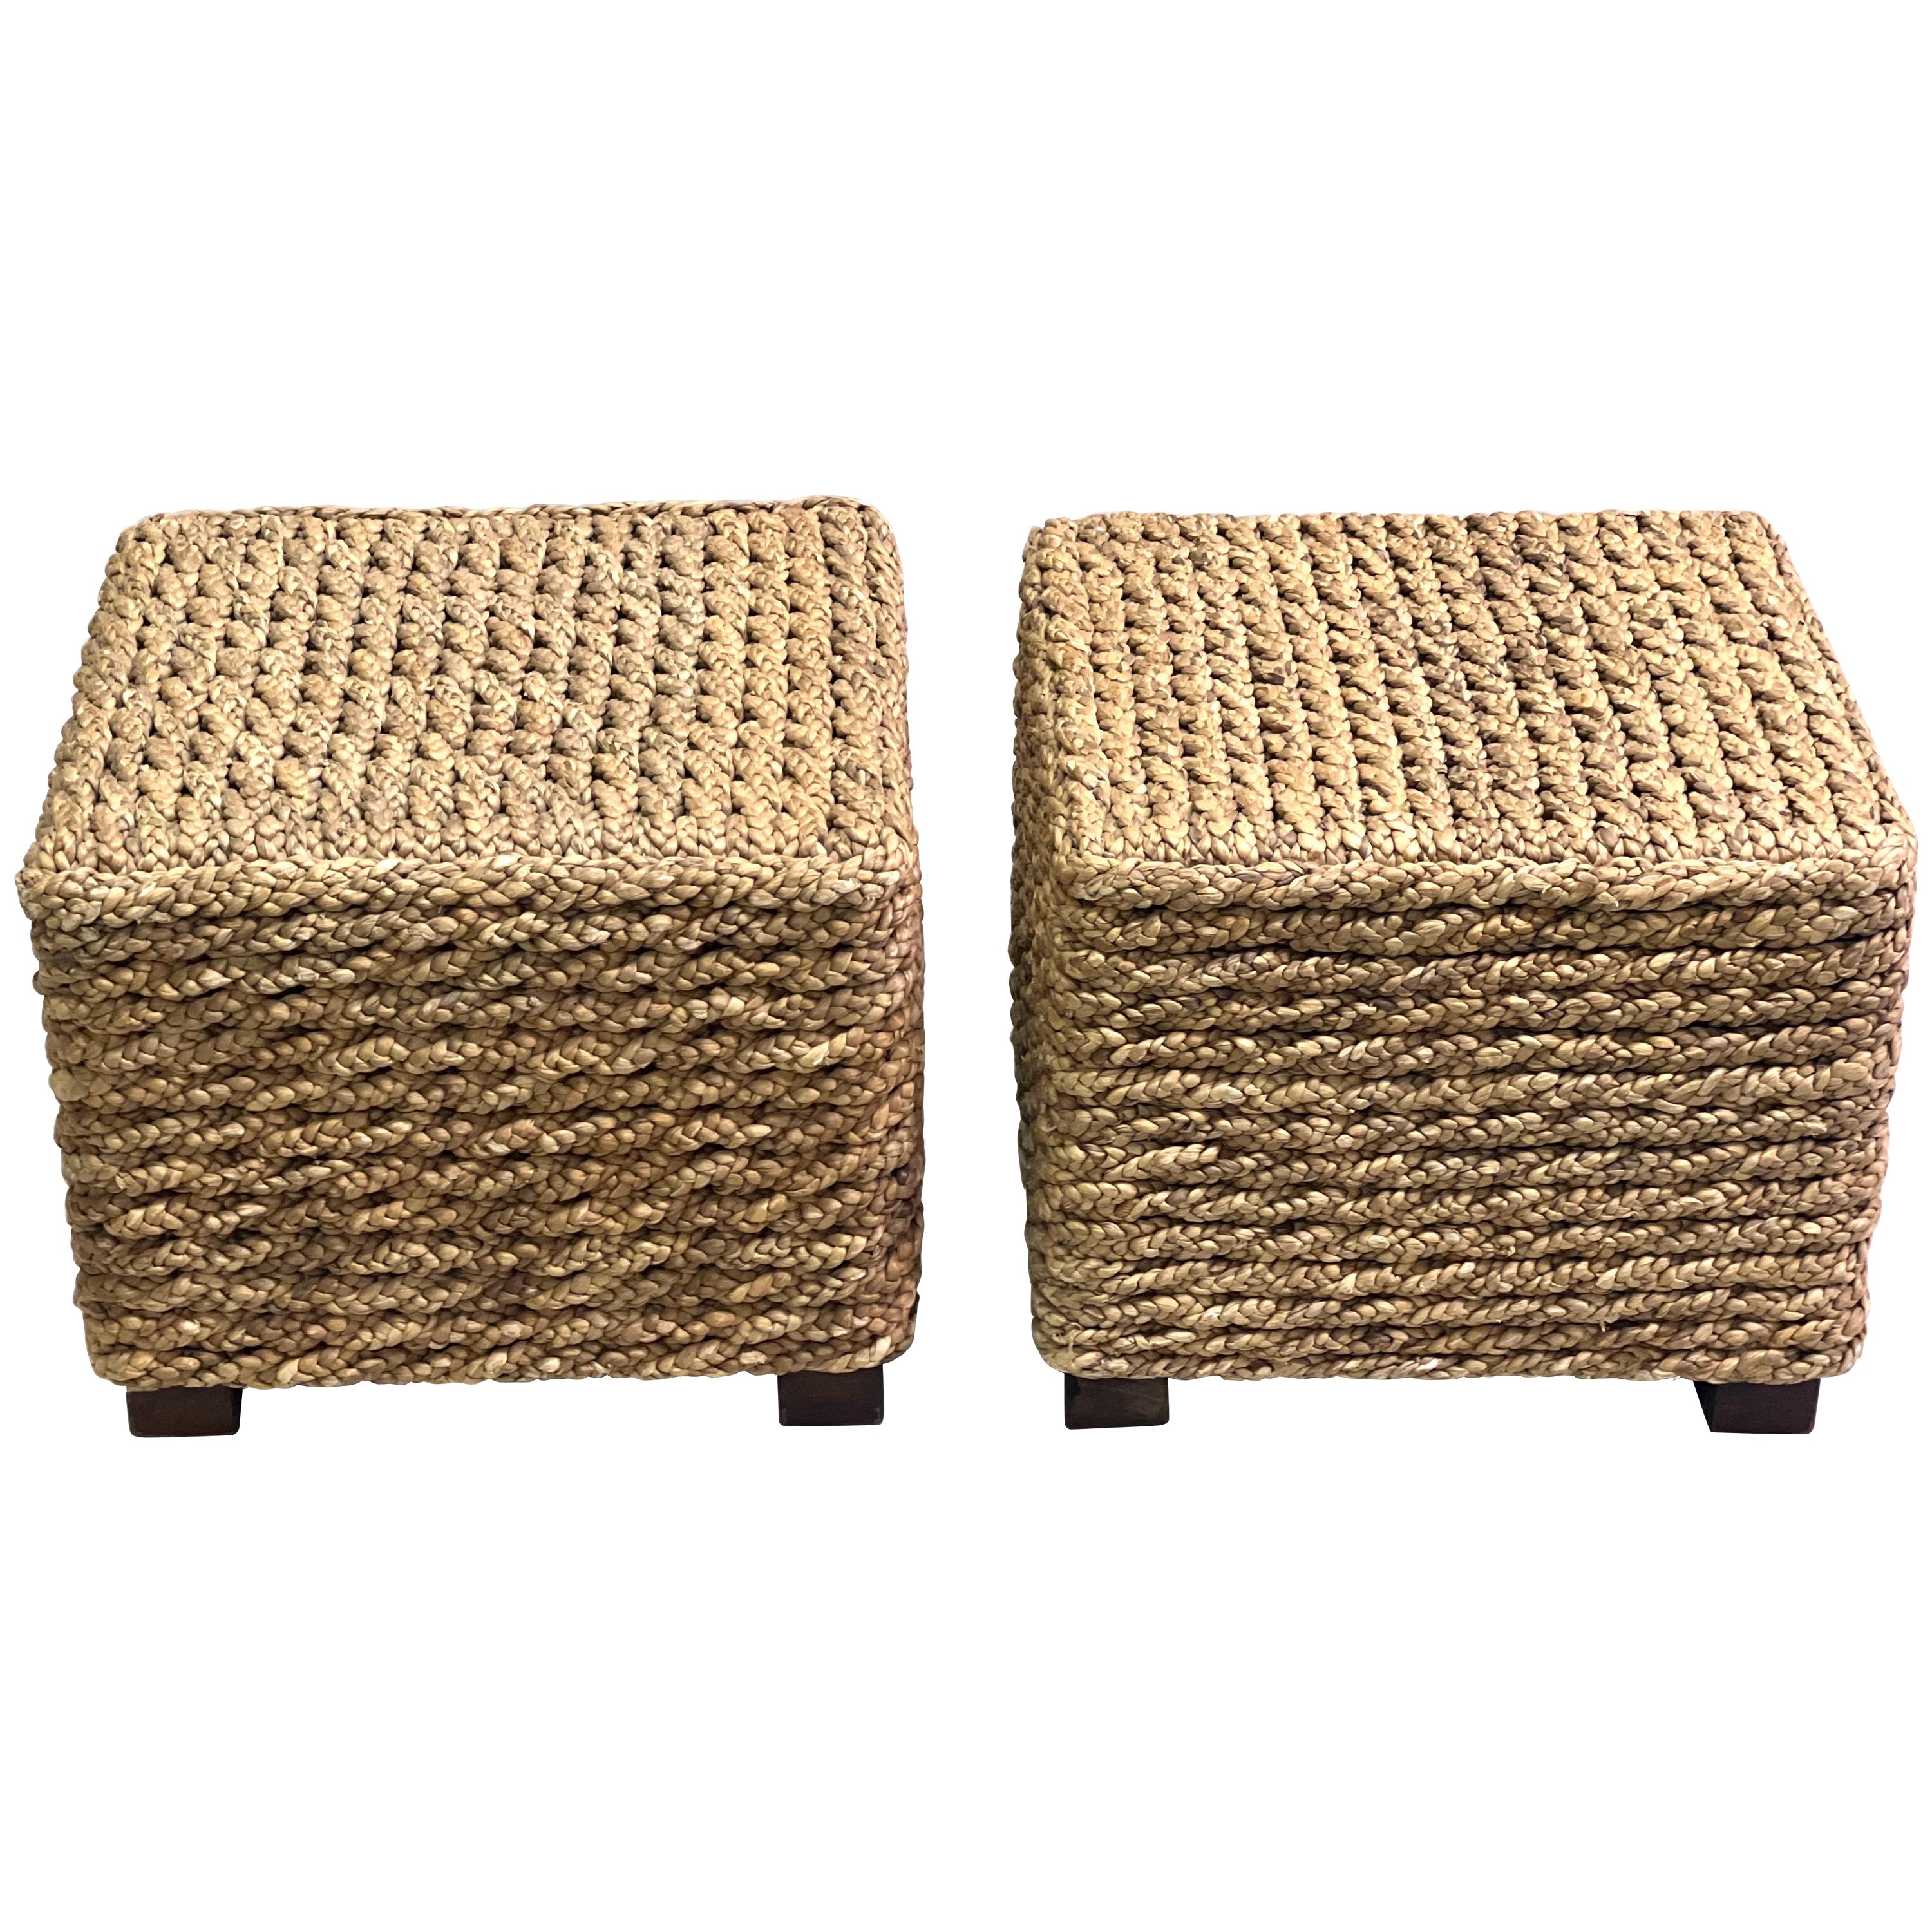 Pair of French Mid-Century Rope Stools / Benches by Adrien Audoux & Frida Minet For Sale